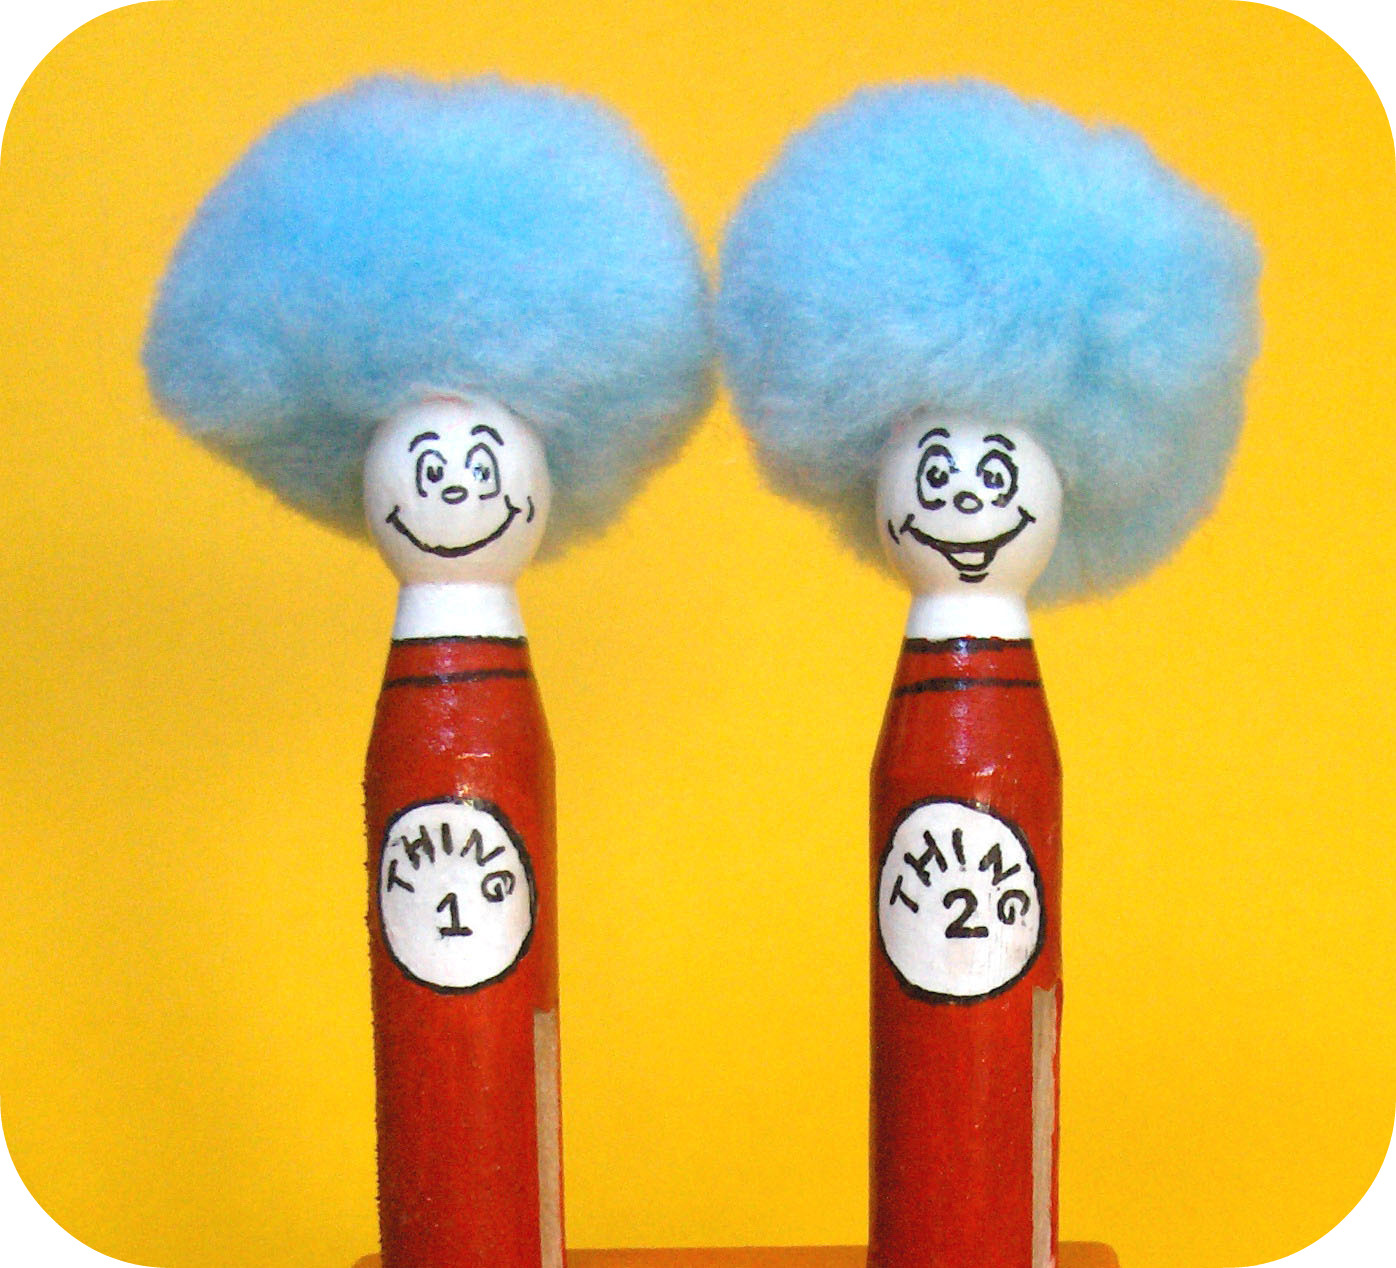 Thing 1 and Thing 2 Clothespin Craft | 25+ Dr. Seuss Party Ideas